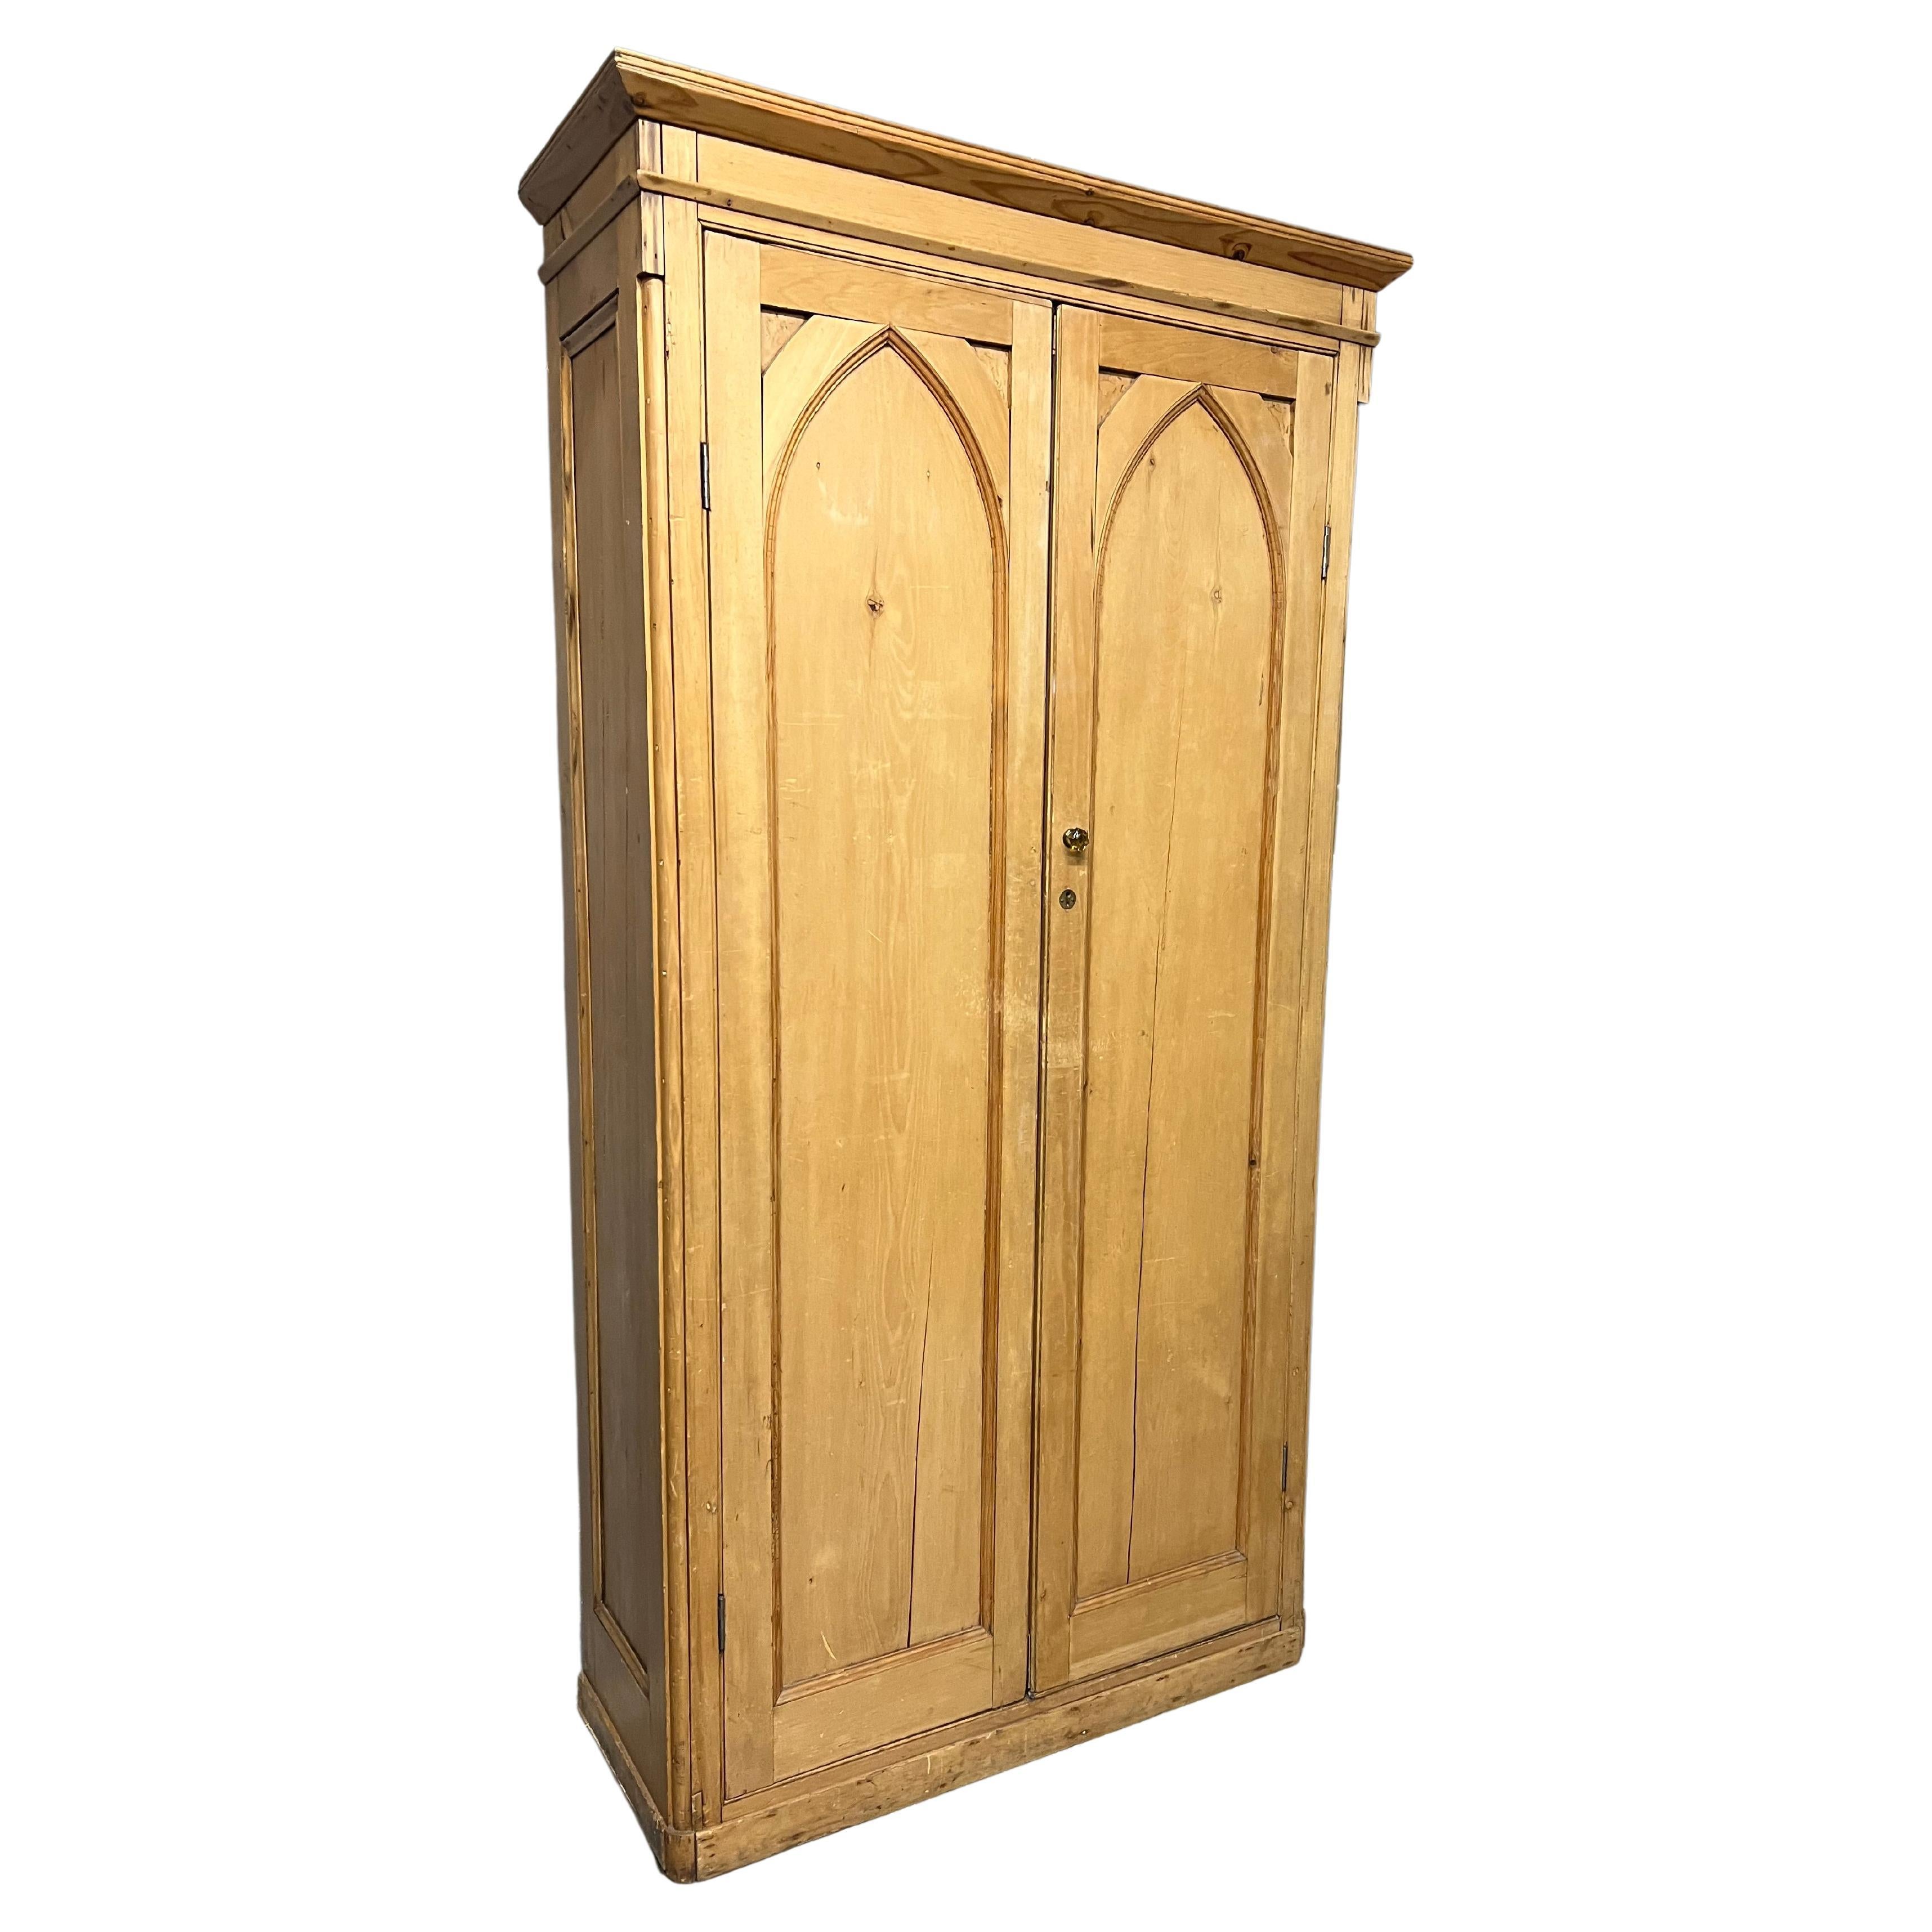 Pine armoire or cupboard - a terrific storage solution!

 Wonderful gothic detailing on this raw pine gives the feel of a Mexican church. This piece has 3 shelves, and the back panel has been cut to easily run cords. Great color, craftsmanship and